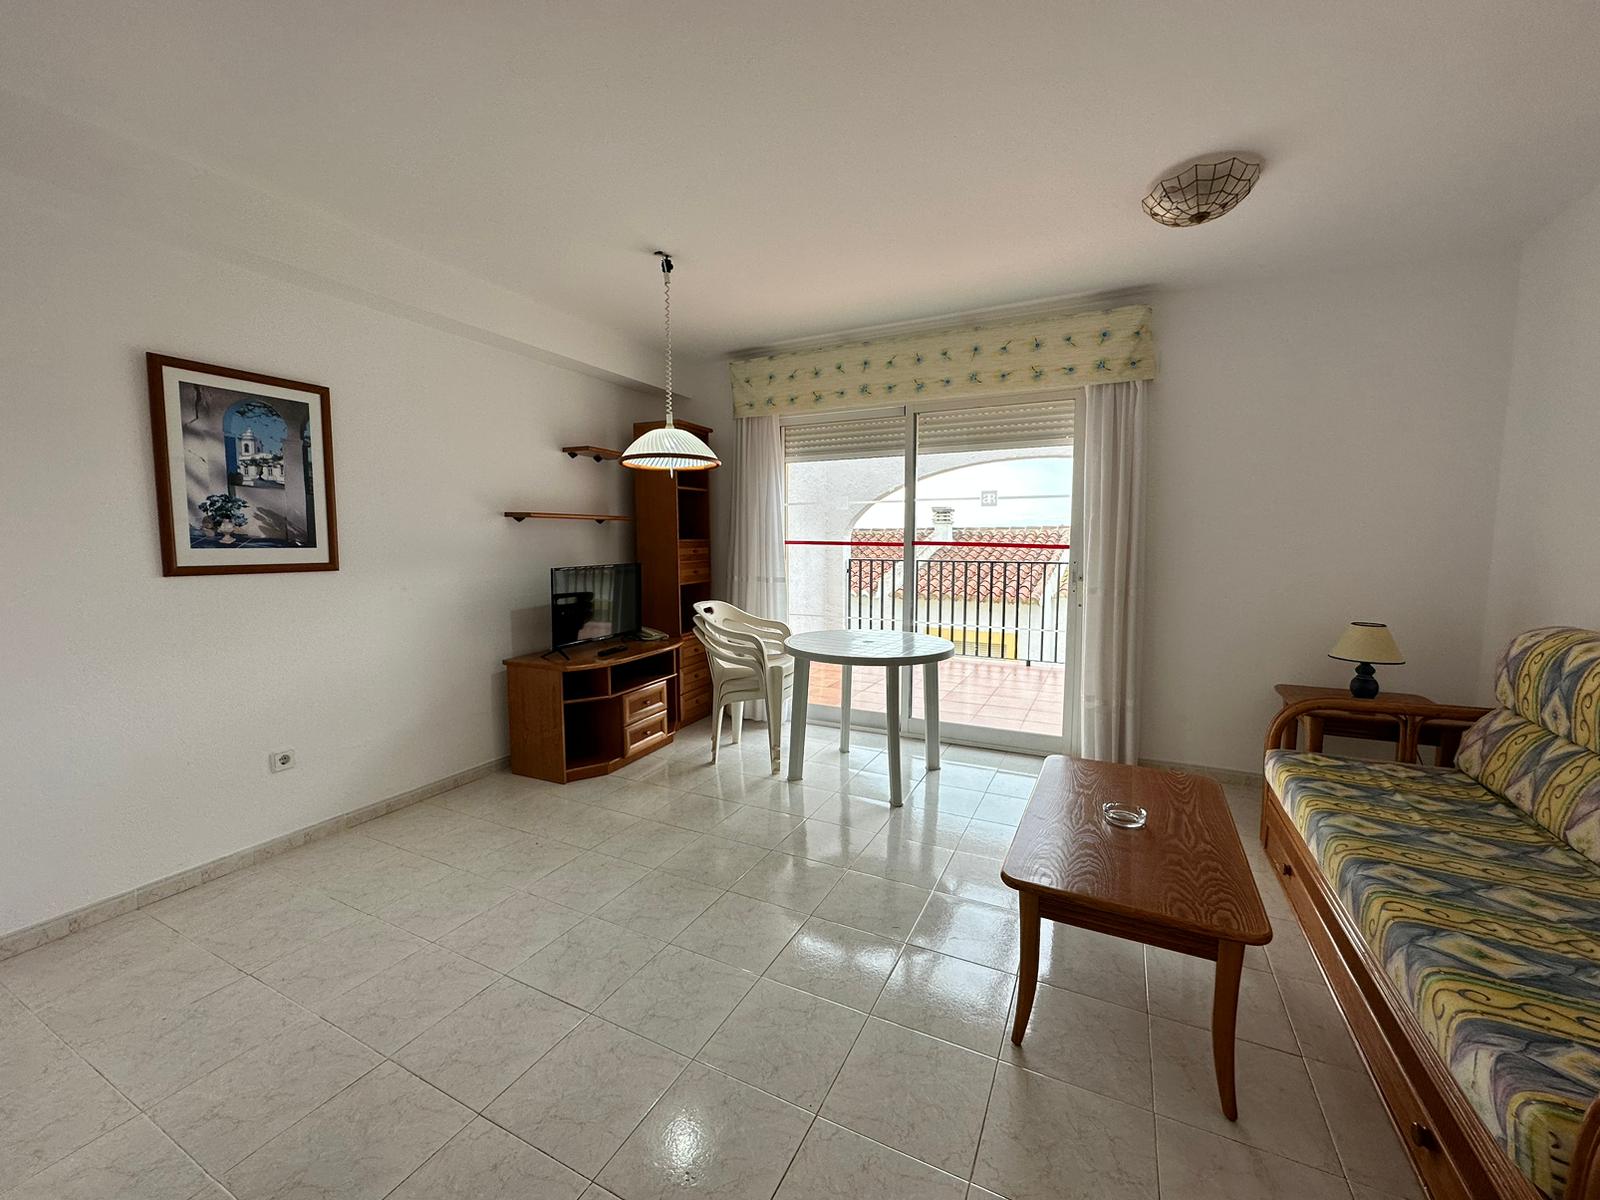 BUNGALOW VERY CLOSE TO THE CENTER IN CALPE